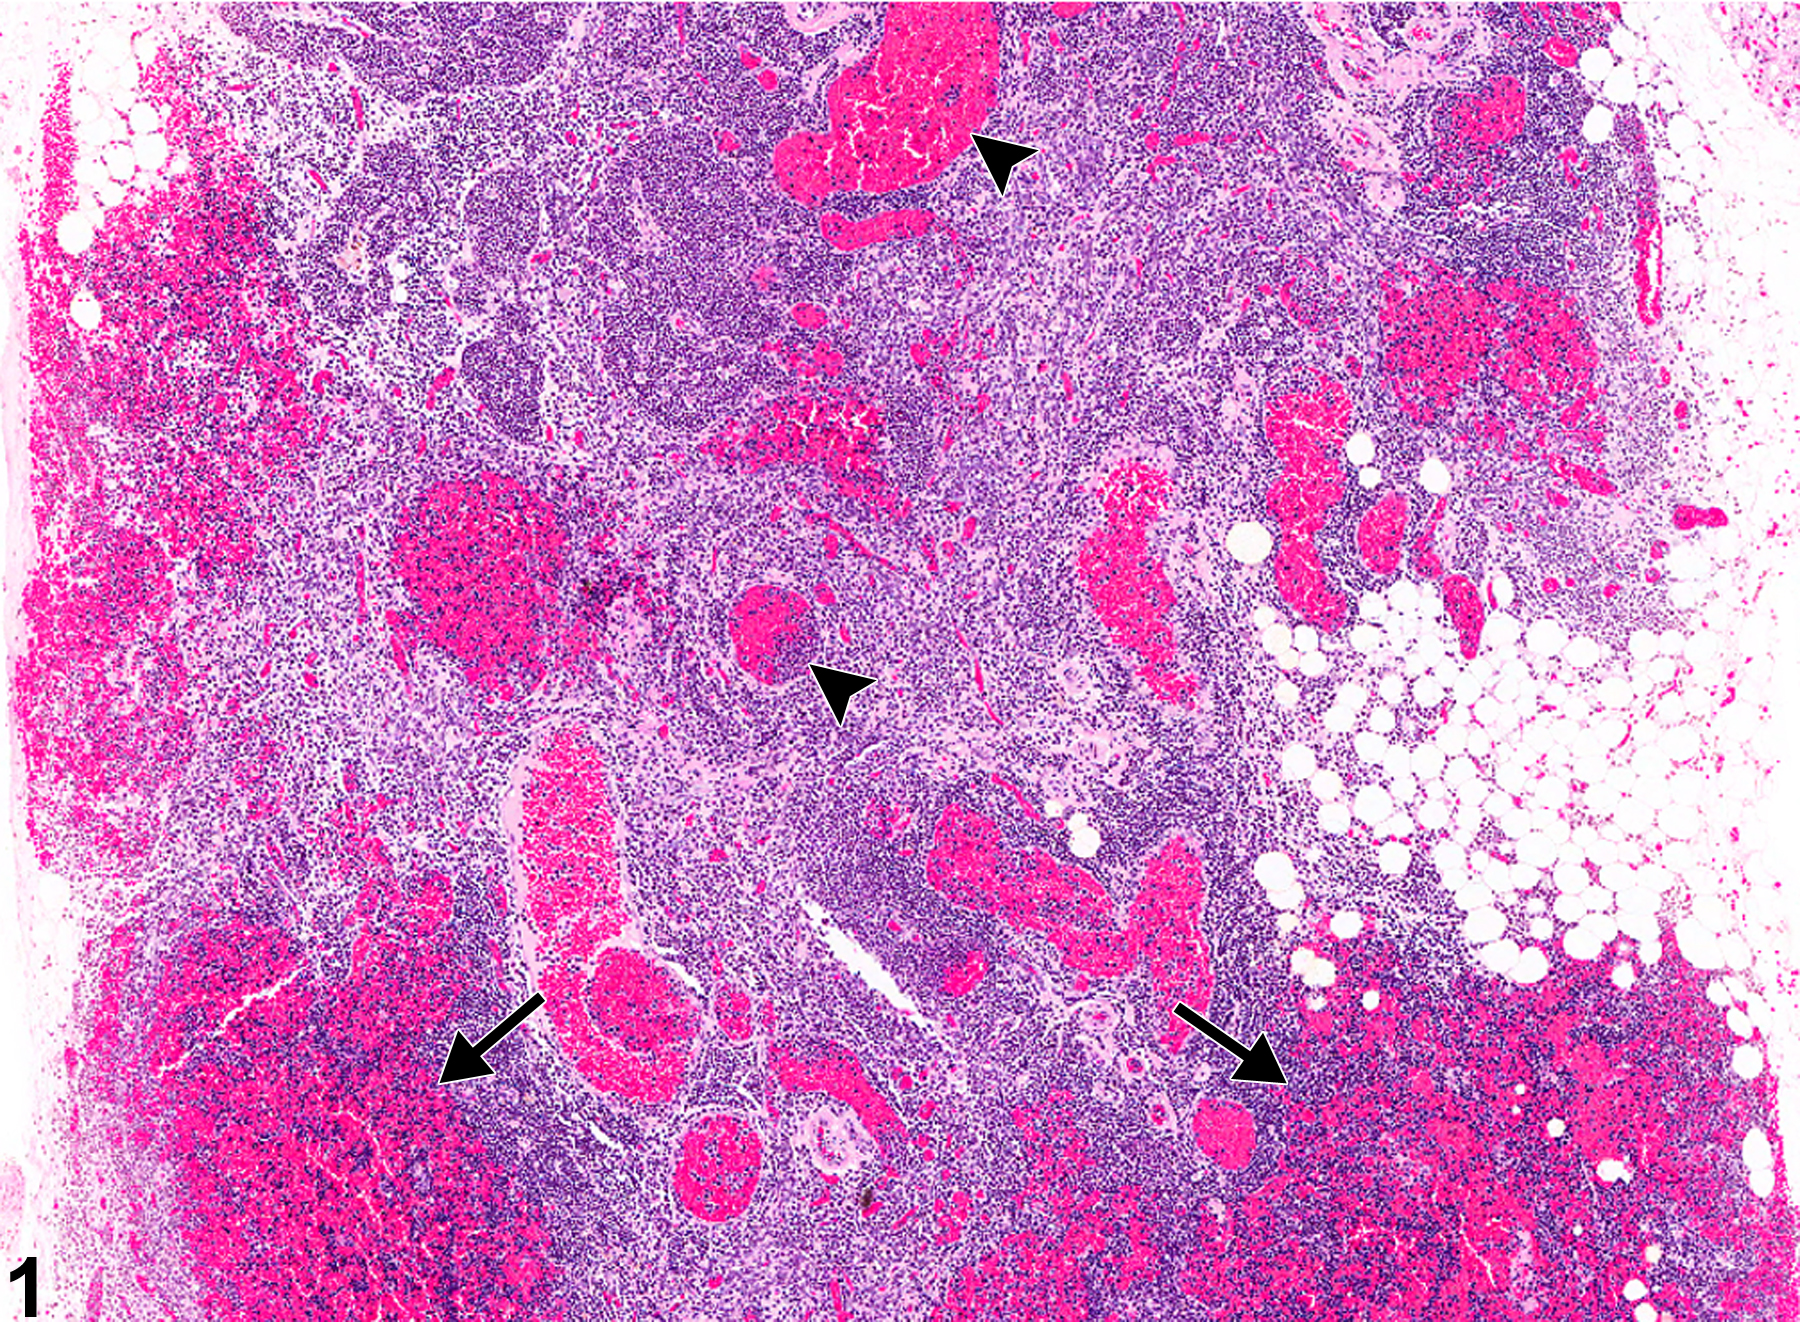 Image of hemorrhage in the thymus from a male F344/N rat in a chronic study